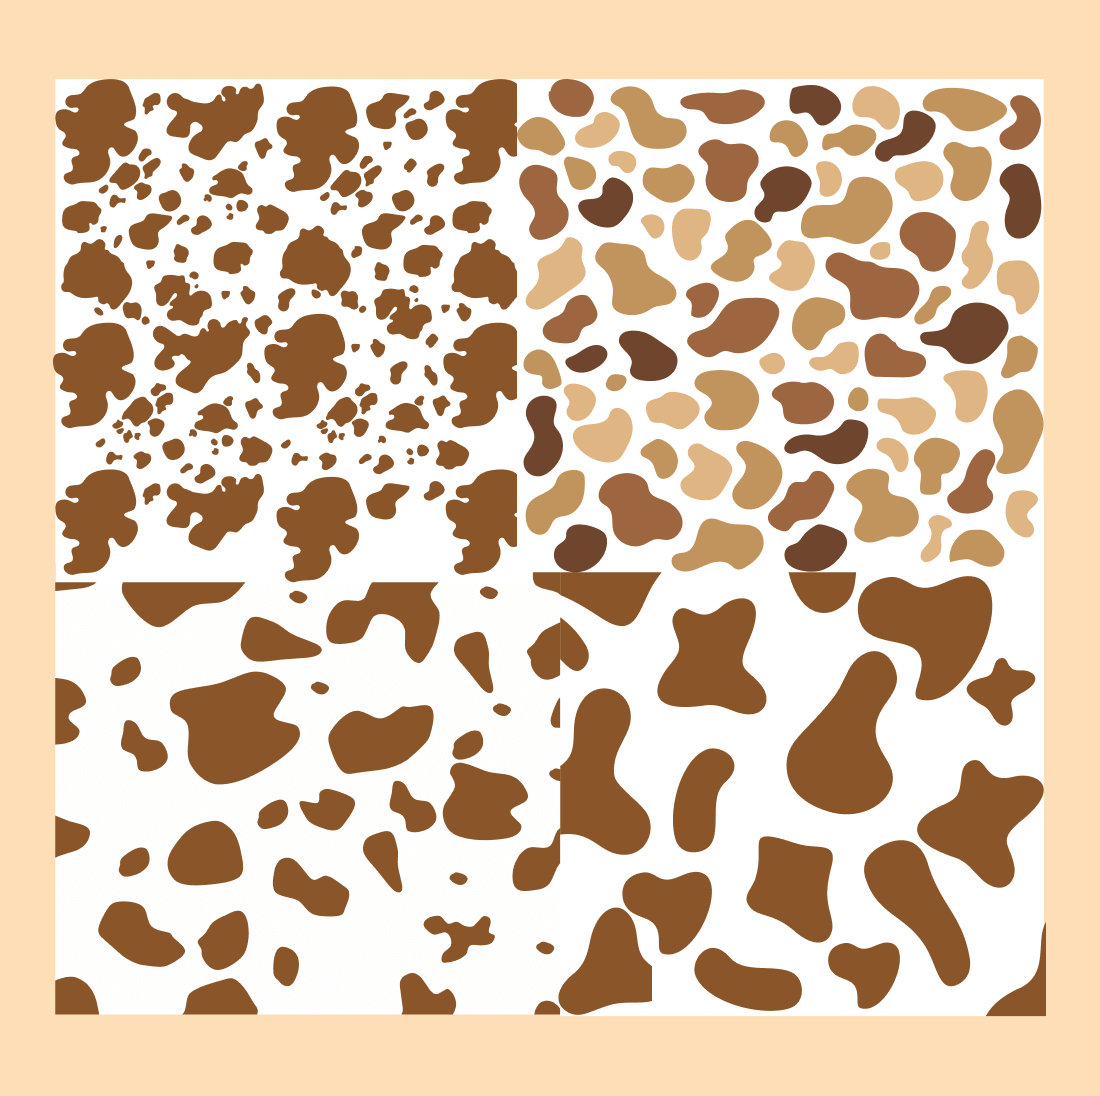 Brown cow spots on a white background.